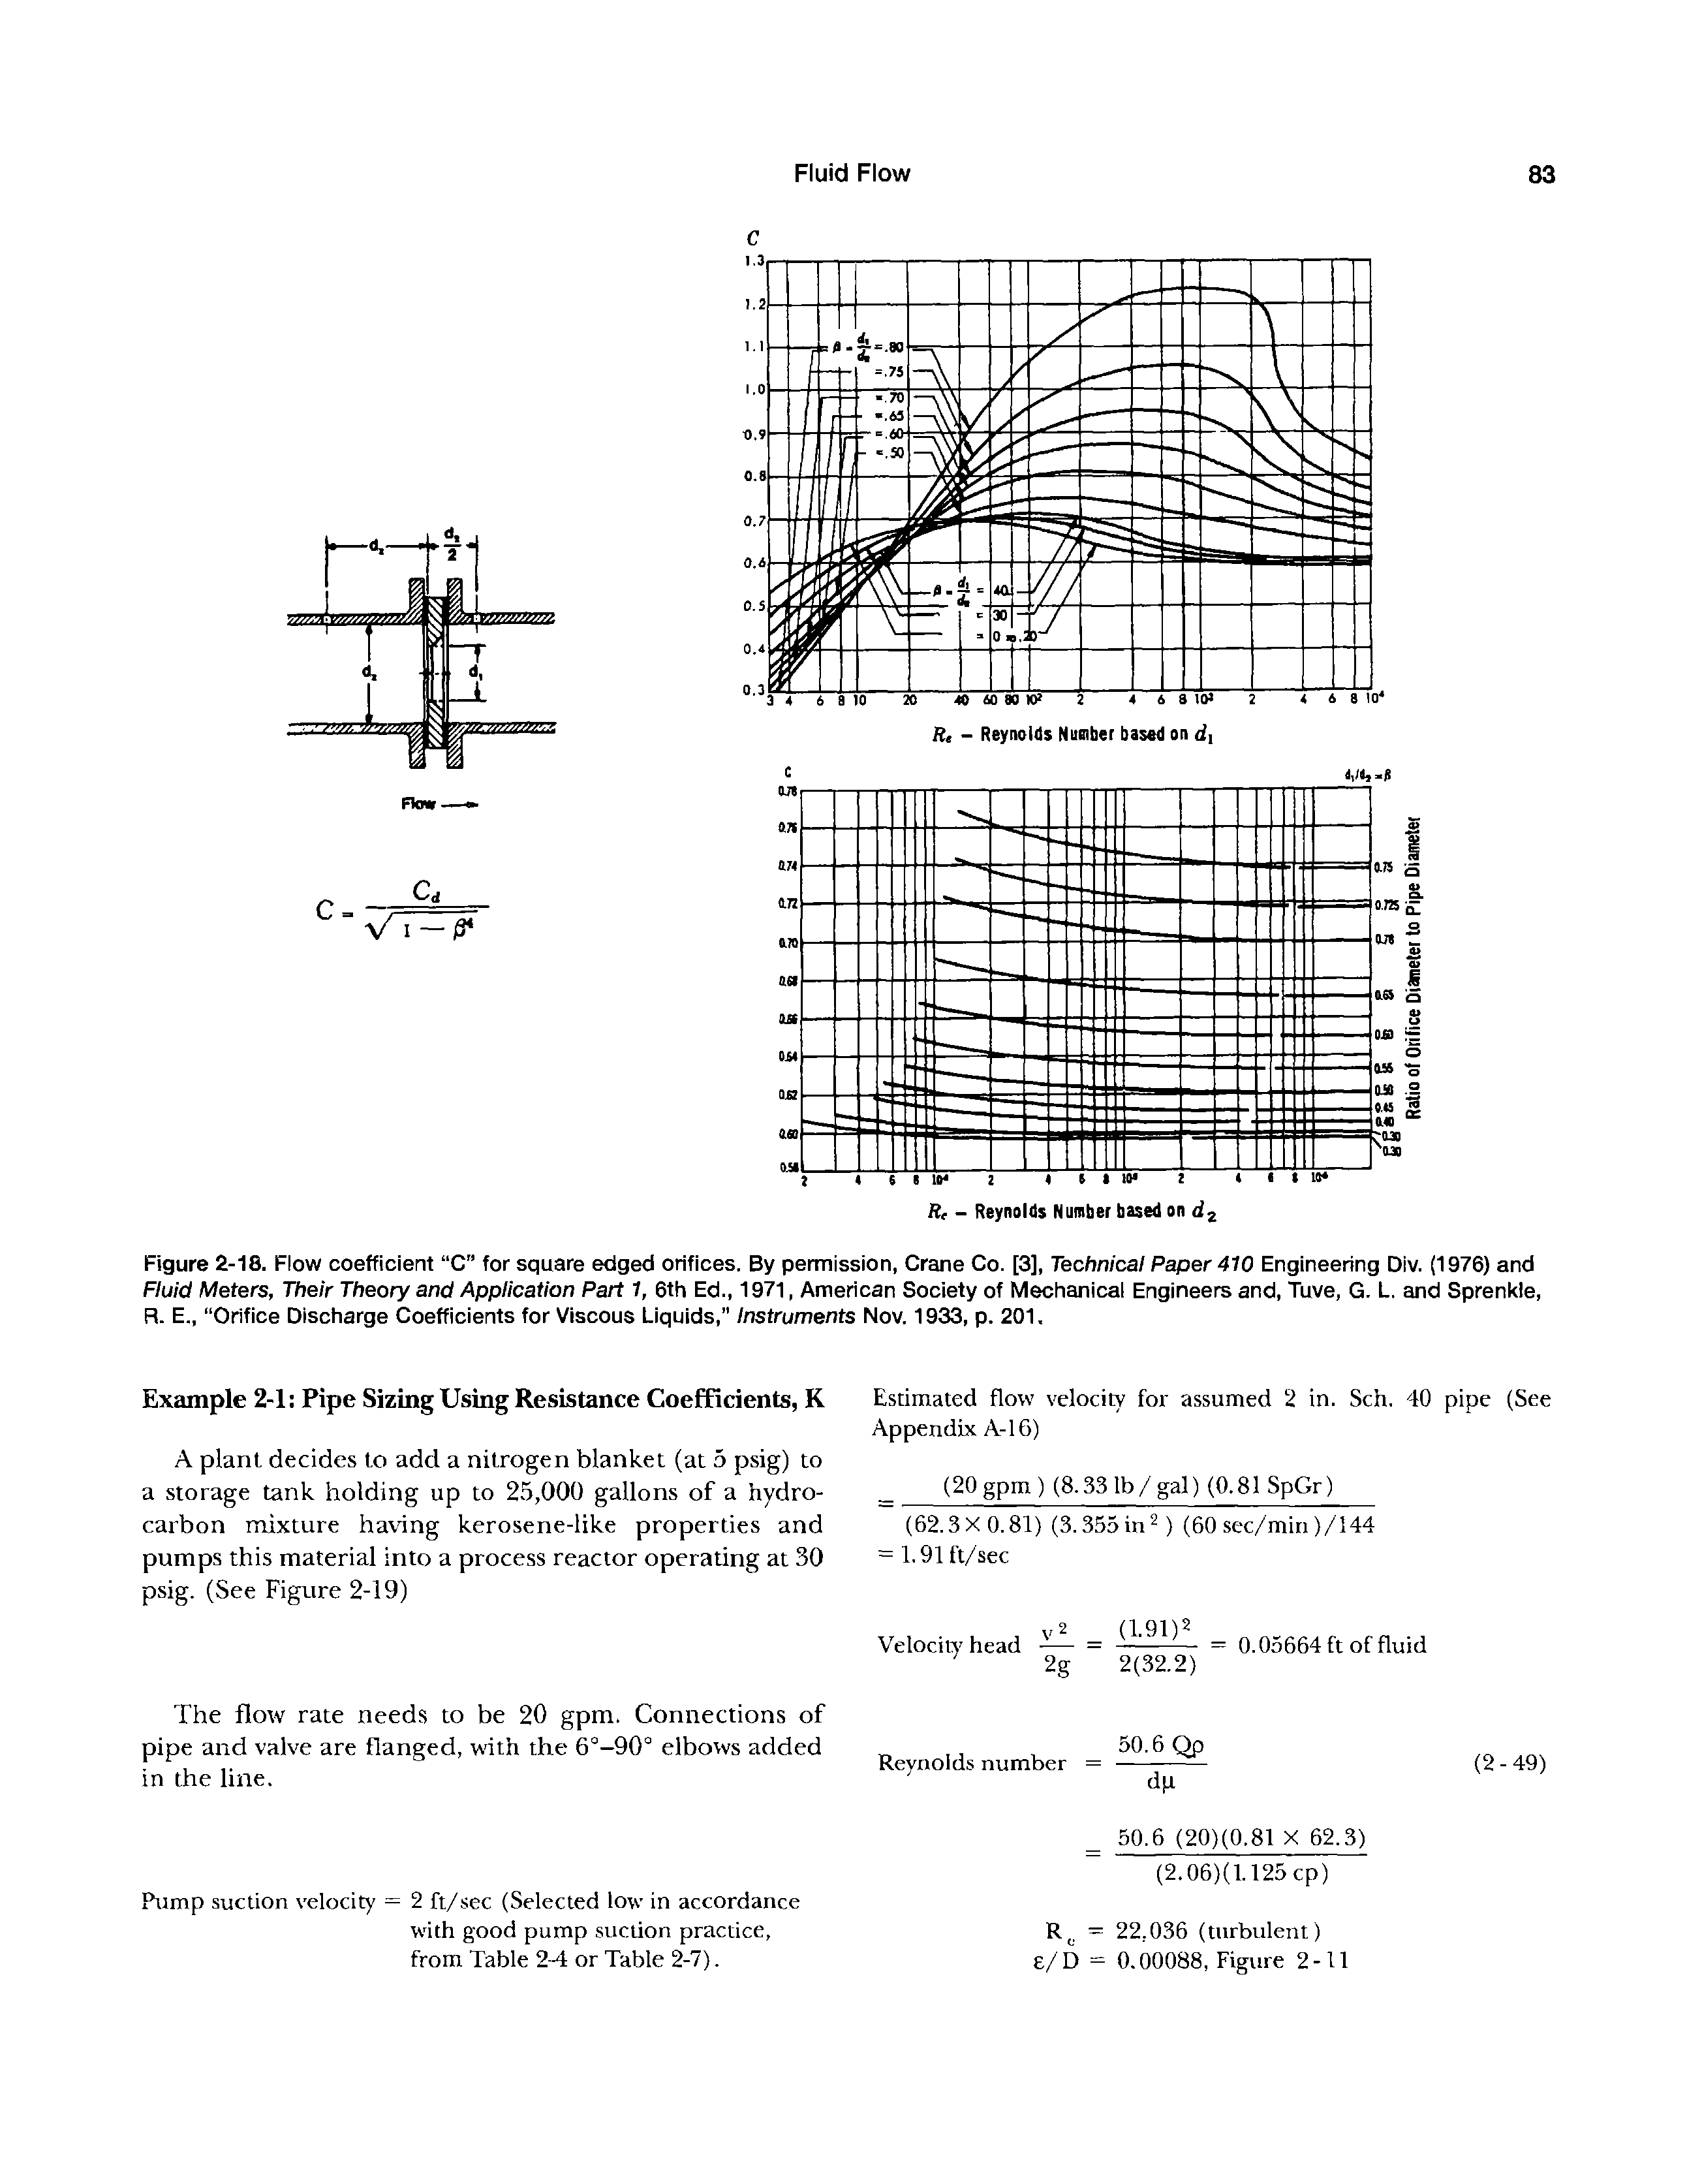 Figure 2-18. Flow coefficient C for square edged orifices. By permission, Crane Co. [3], Technical Paper 410 Engineering Div. (1976) and Fluid Meters, Their Theory and Application Part 1, 6th Ed., 1971, American Society of Mechanical Engineers and, Tuve, G. L. and Sprenkle, R. E., Orifice Discharge Coefficients for Viscous Liquids, Instruments Nov. 1933, p. 201.